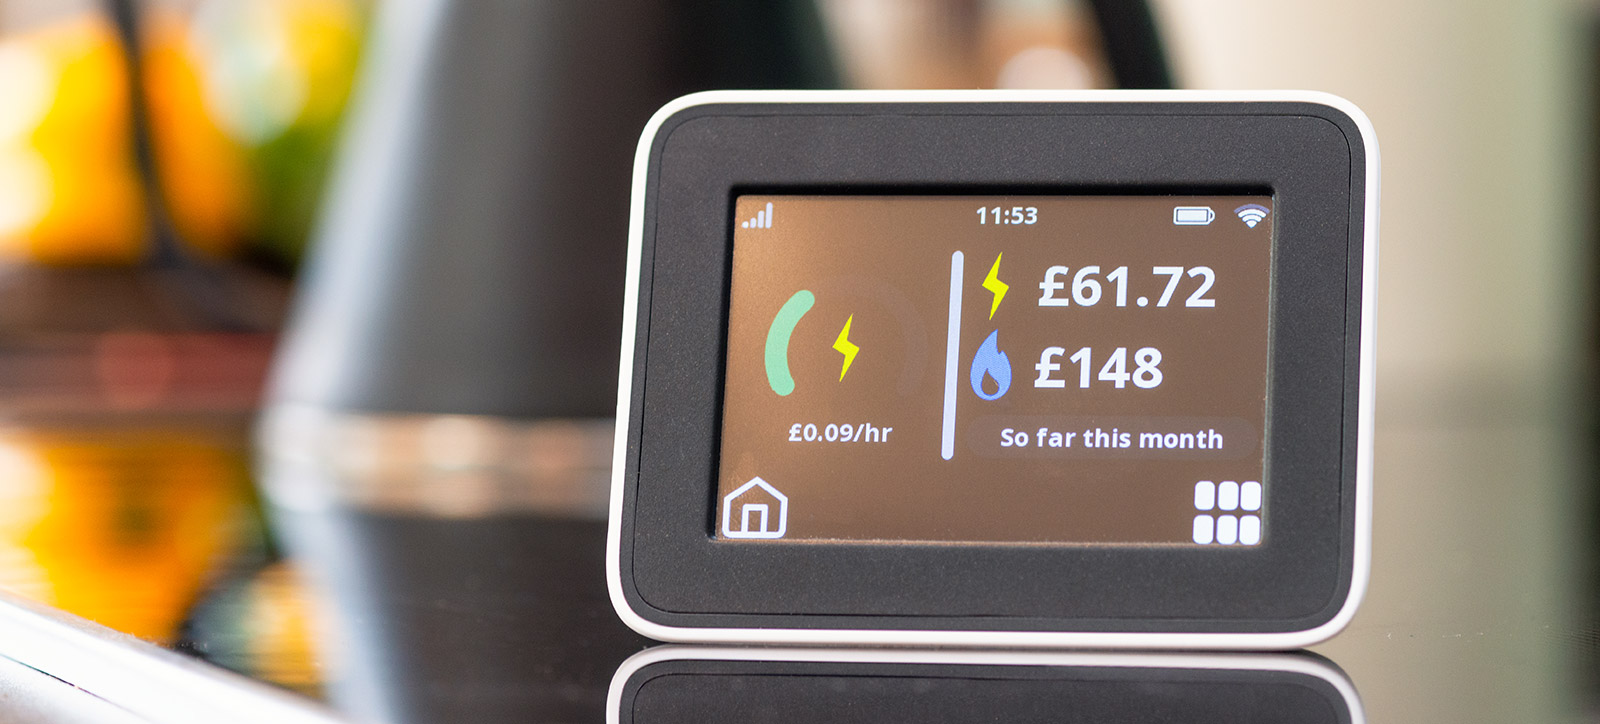 A smart metre showing an expensive gas bill reading.